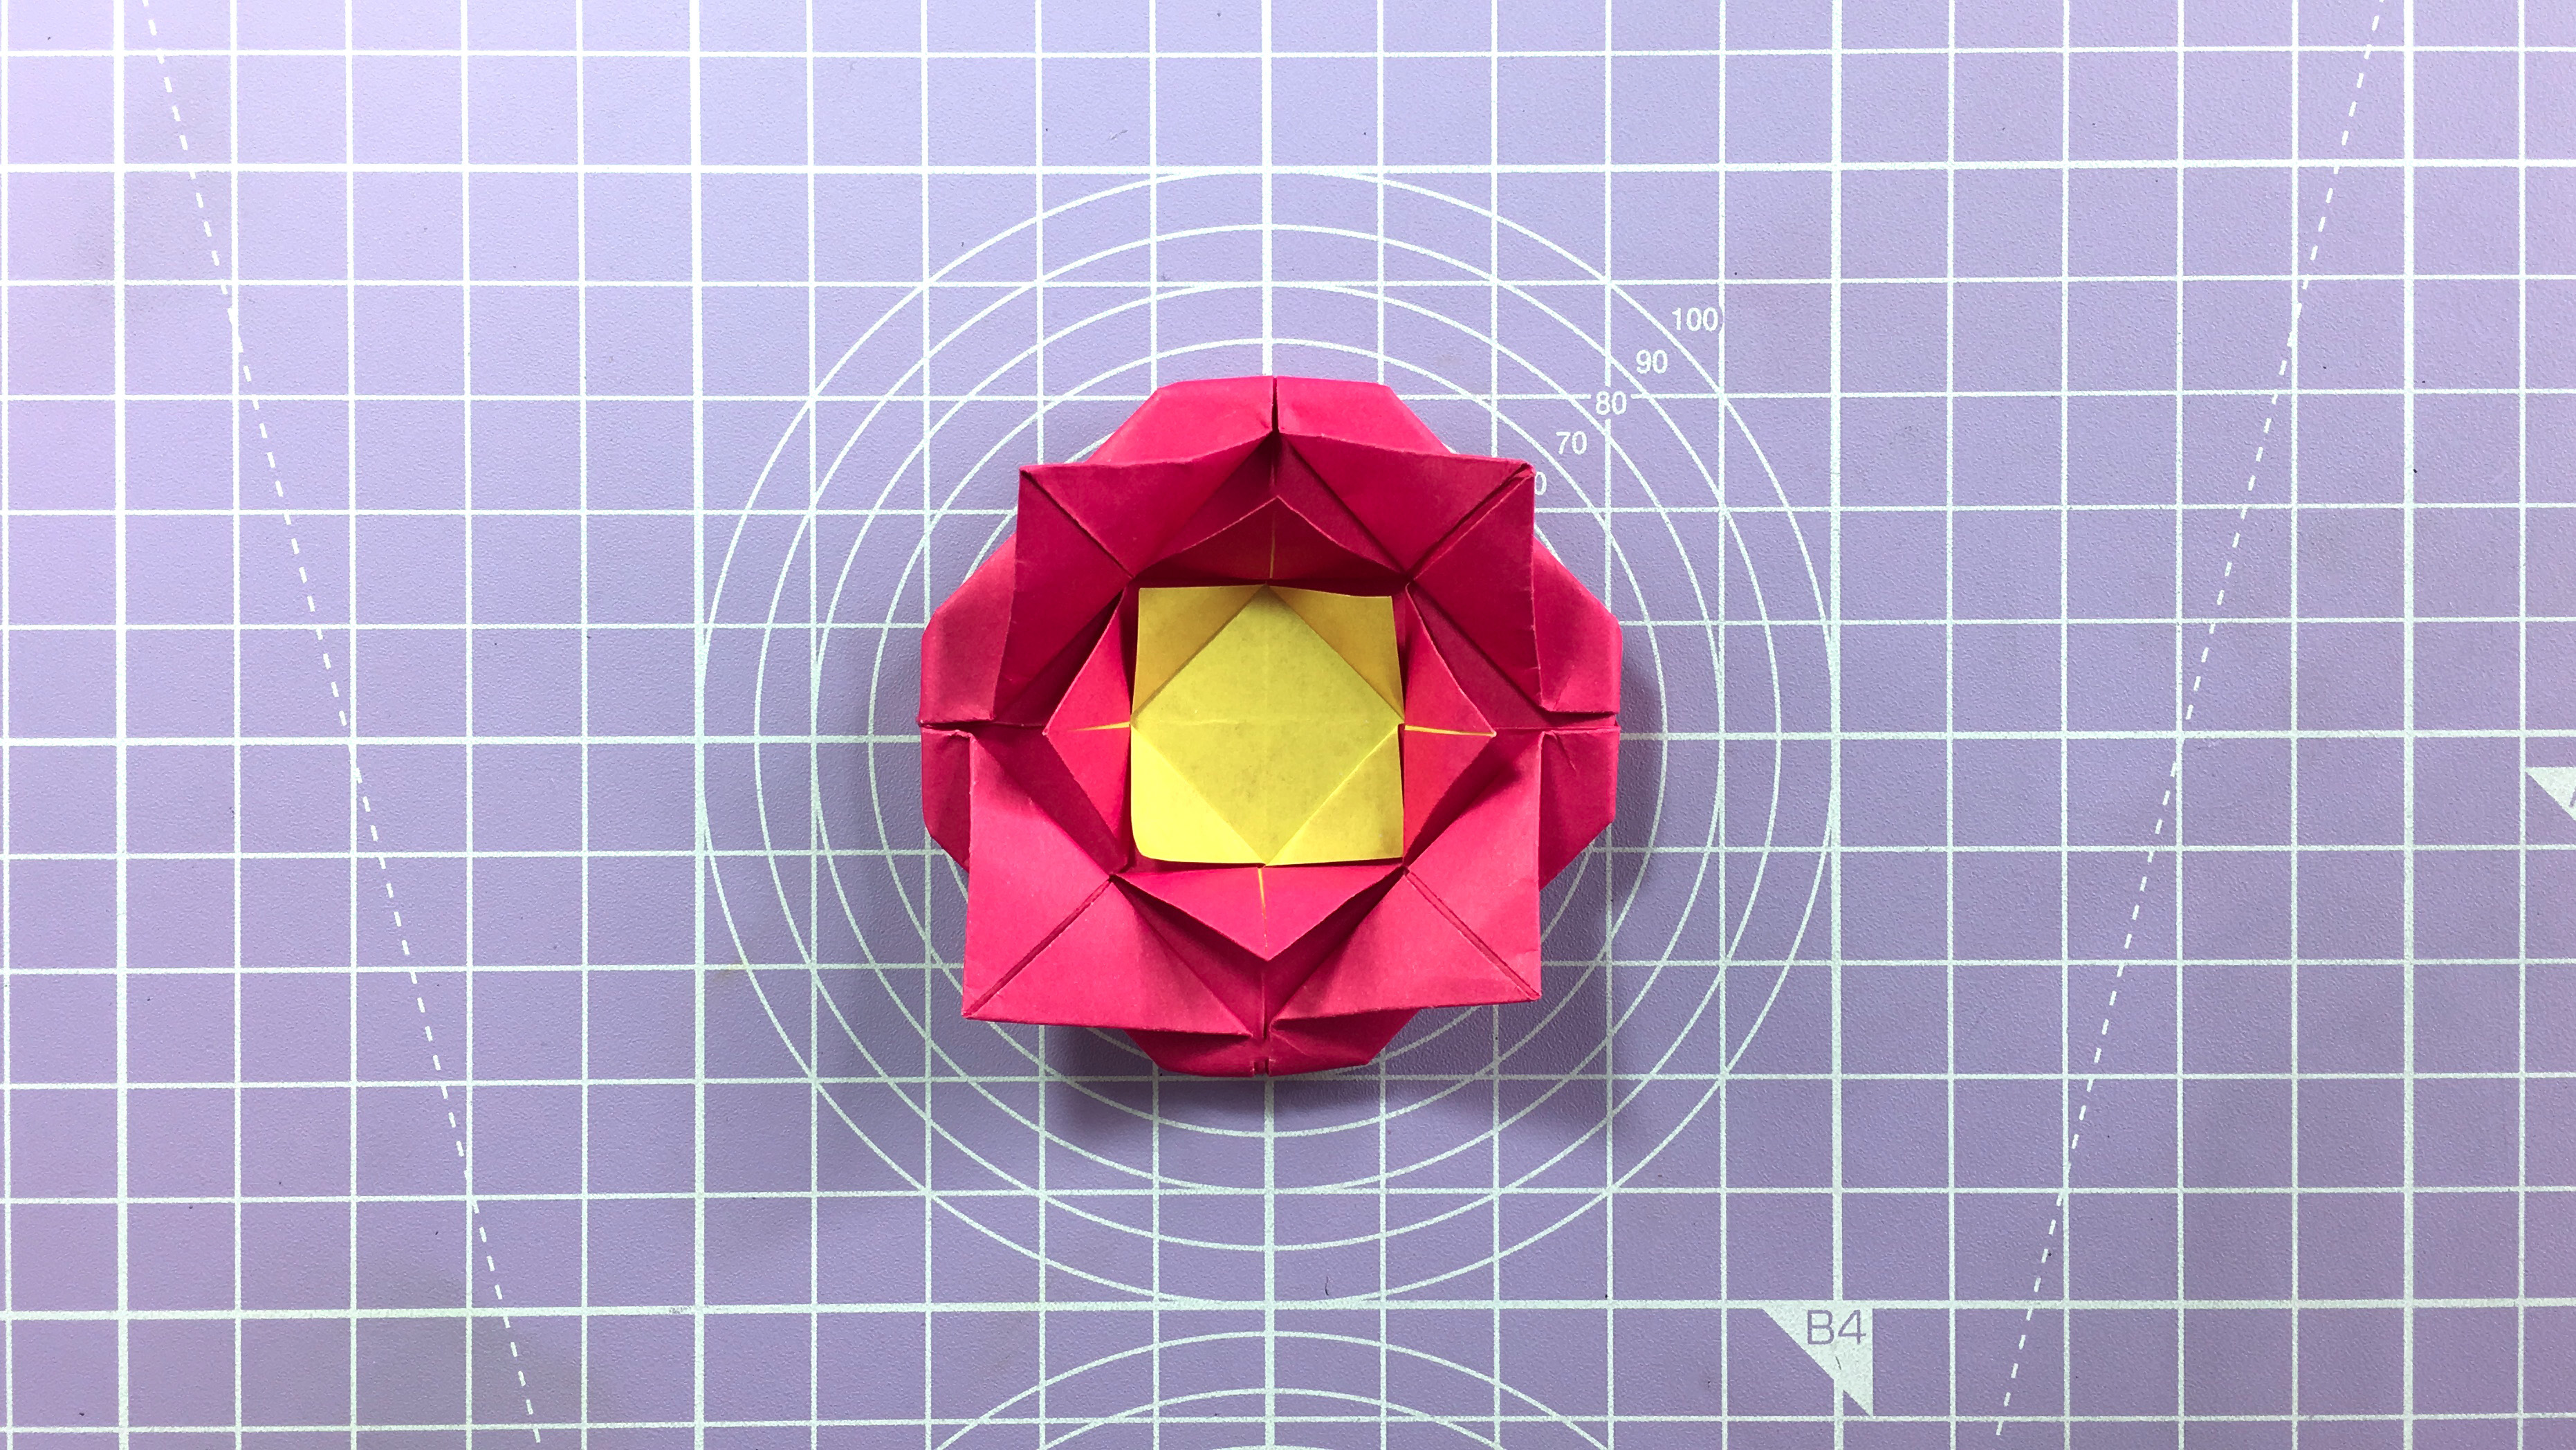 How to make an easy origami rose - step 12b - front